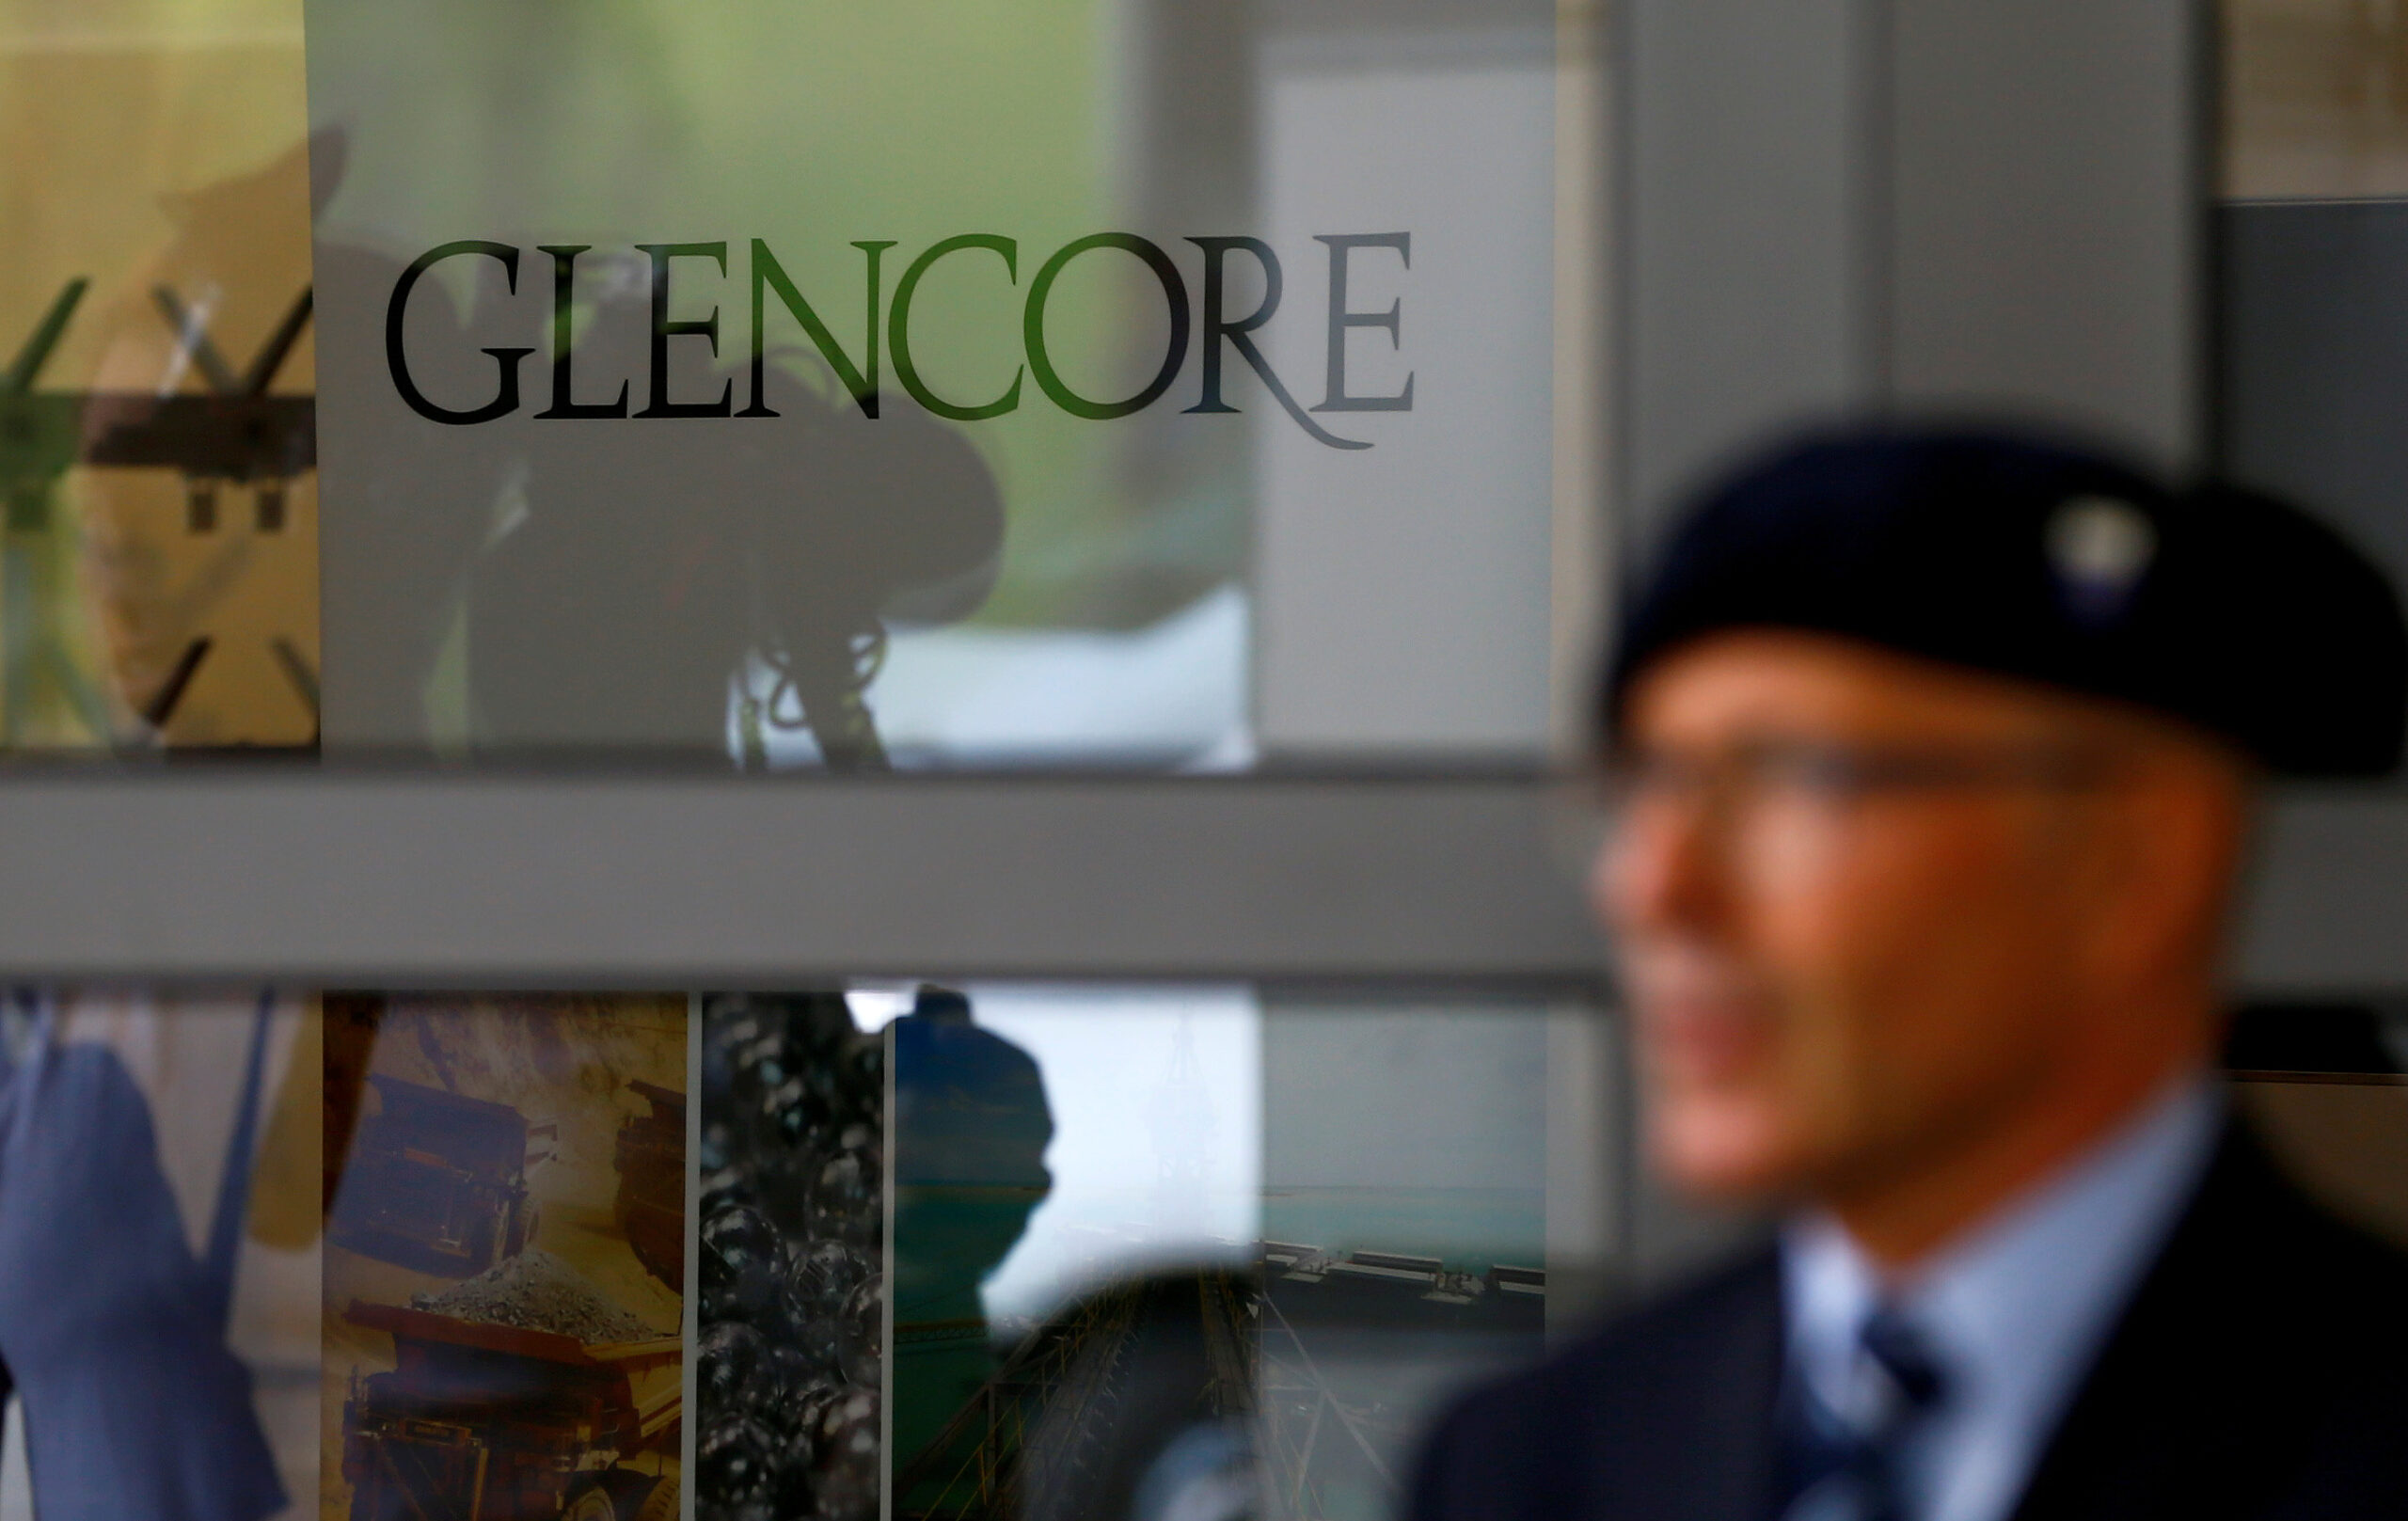 Glencore CEO Reiterates Support for Coal at Annual General Meeting